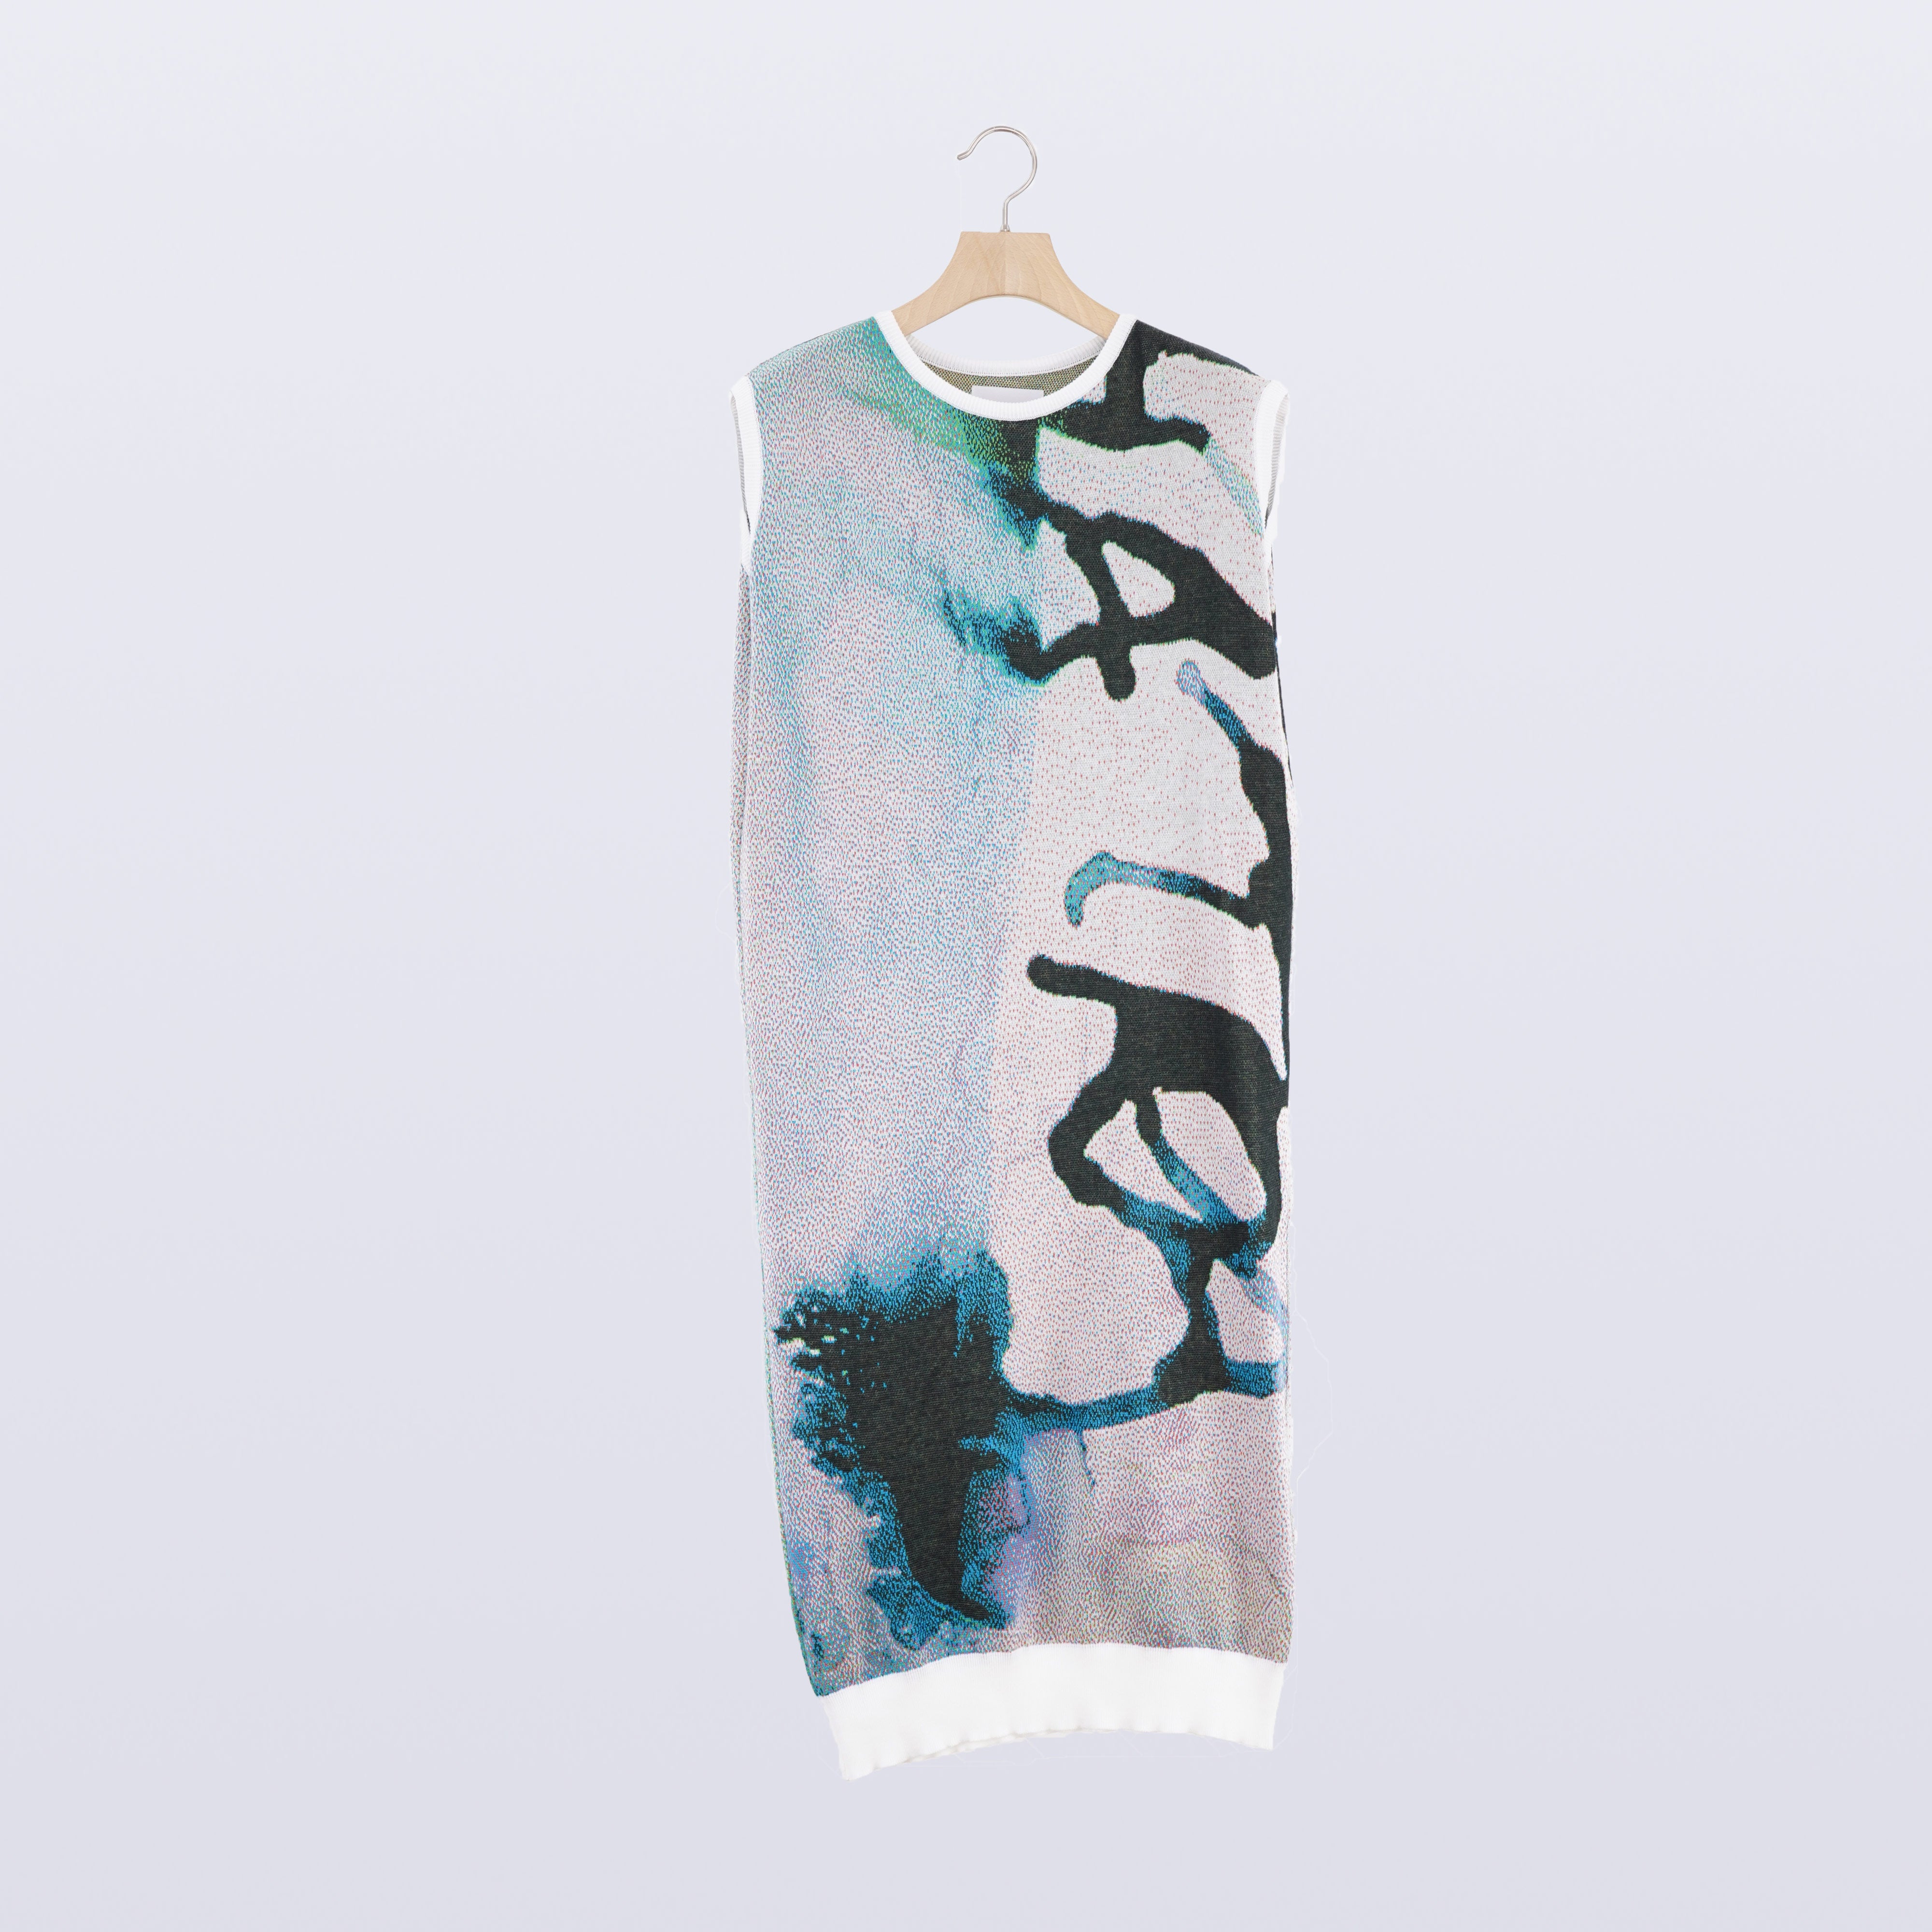 INK SCAPE KNIT – HATRA OFFICIAL